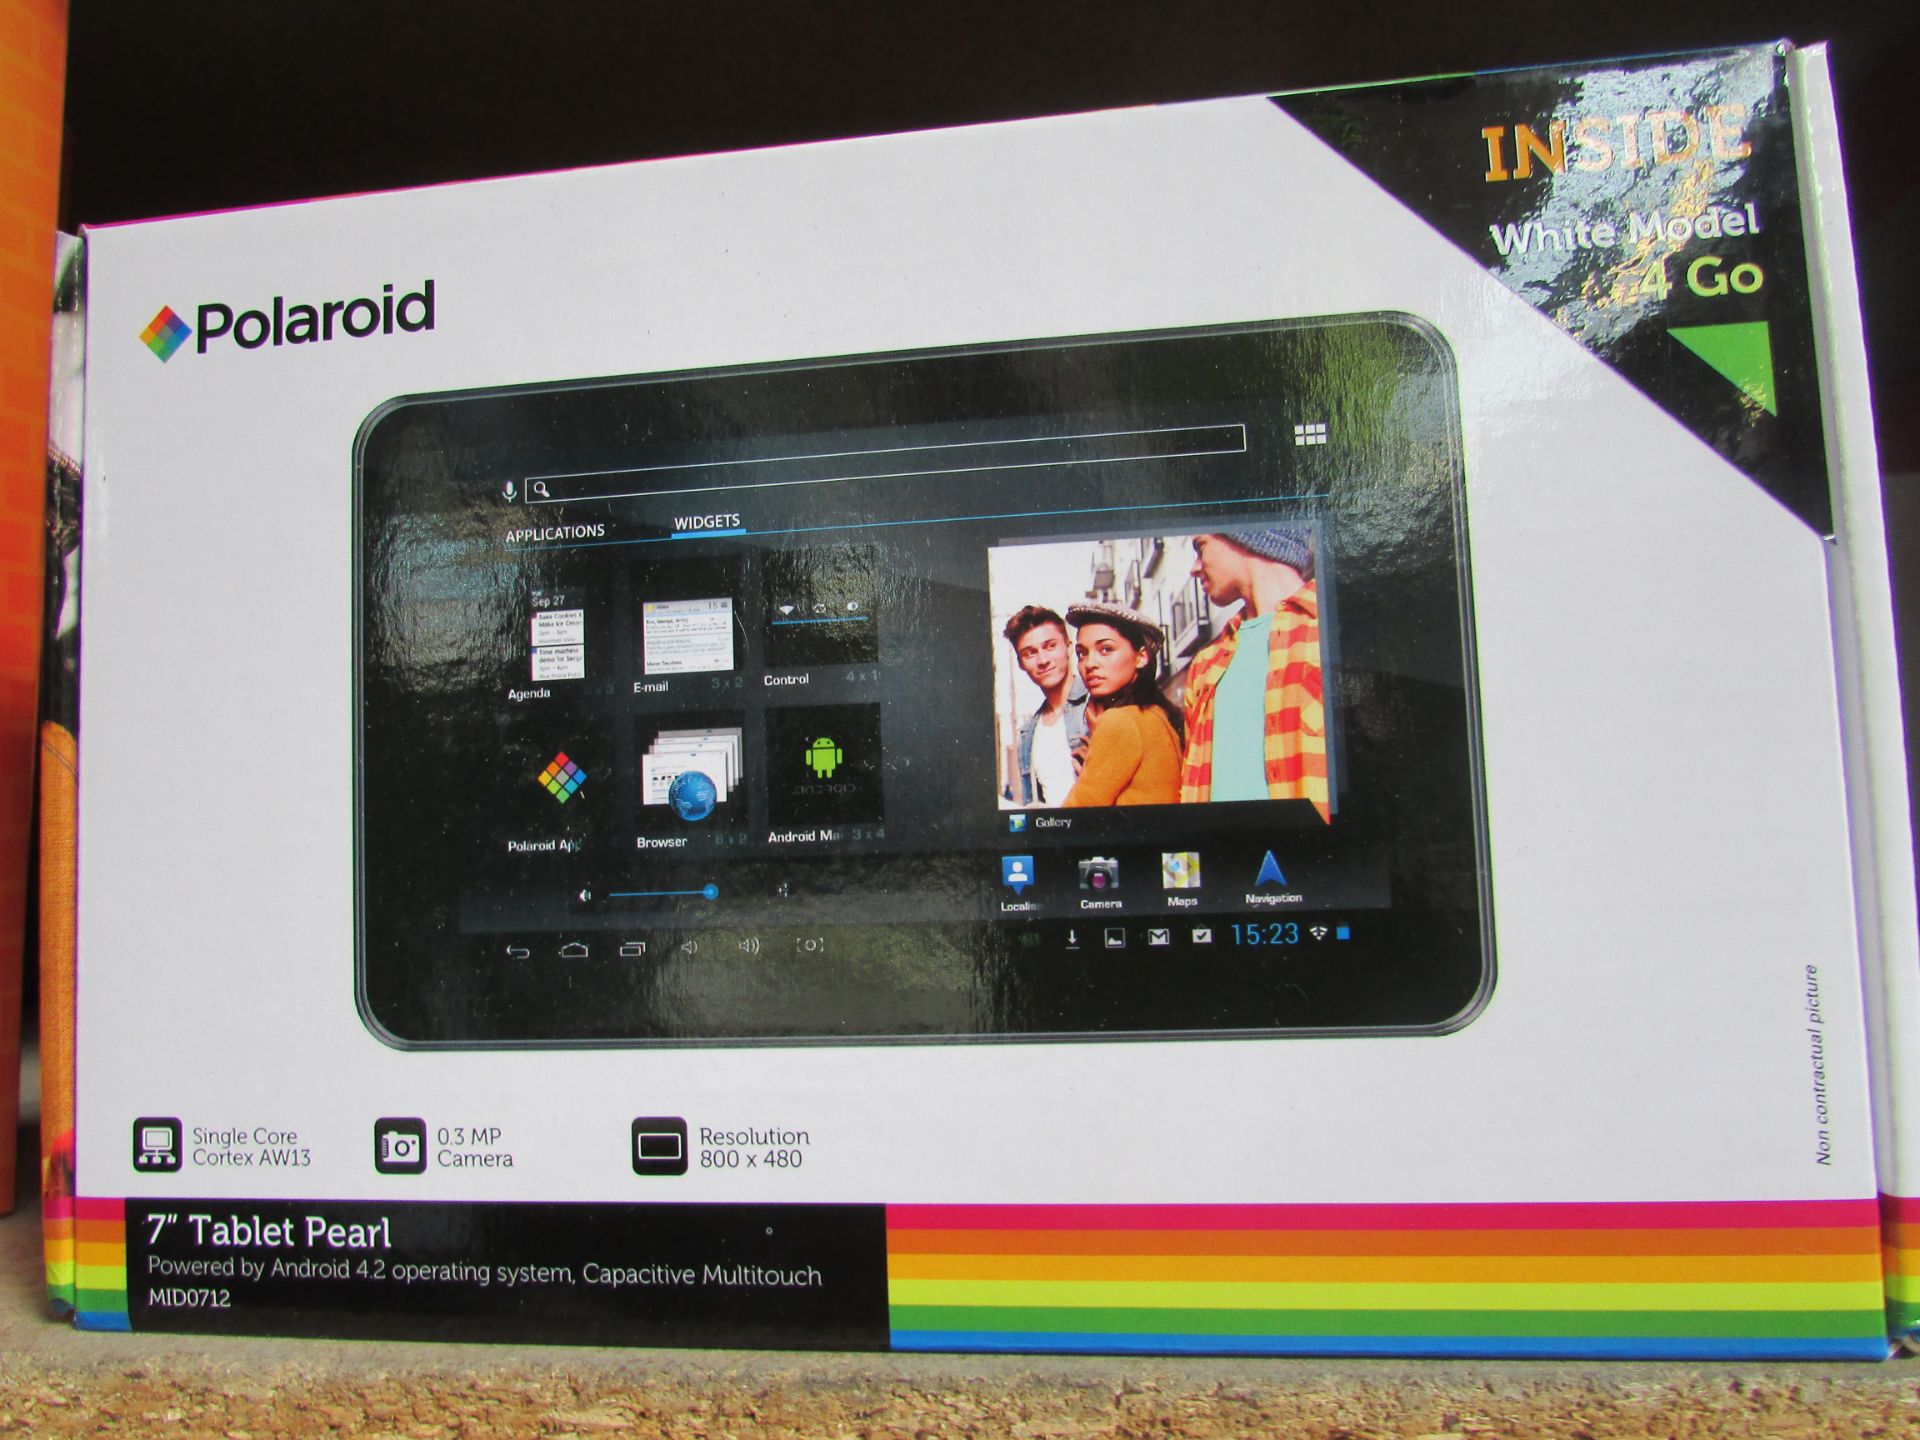 POLAROID 7" TABLET POWERD BY ANDROID 4.2 OPERATING SYSTEM